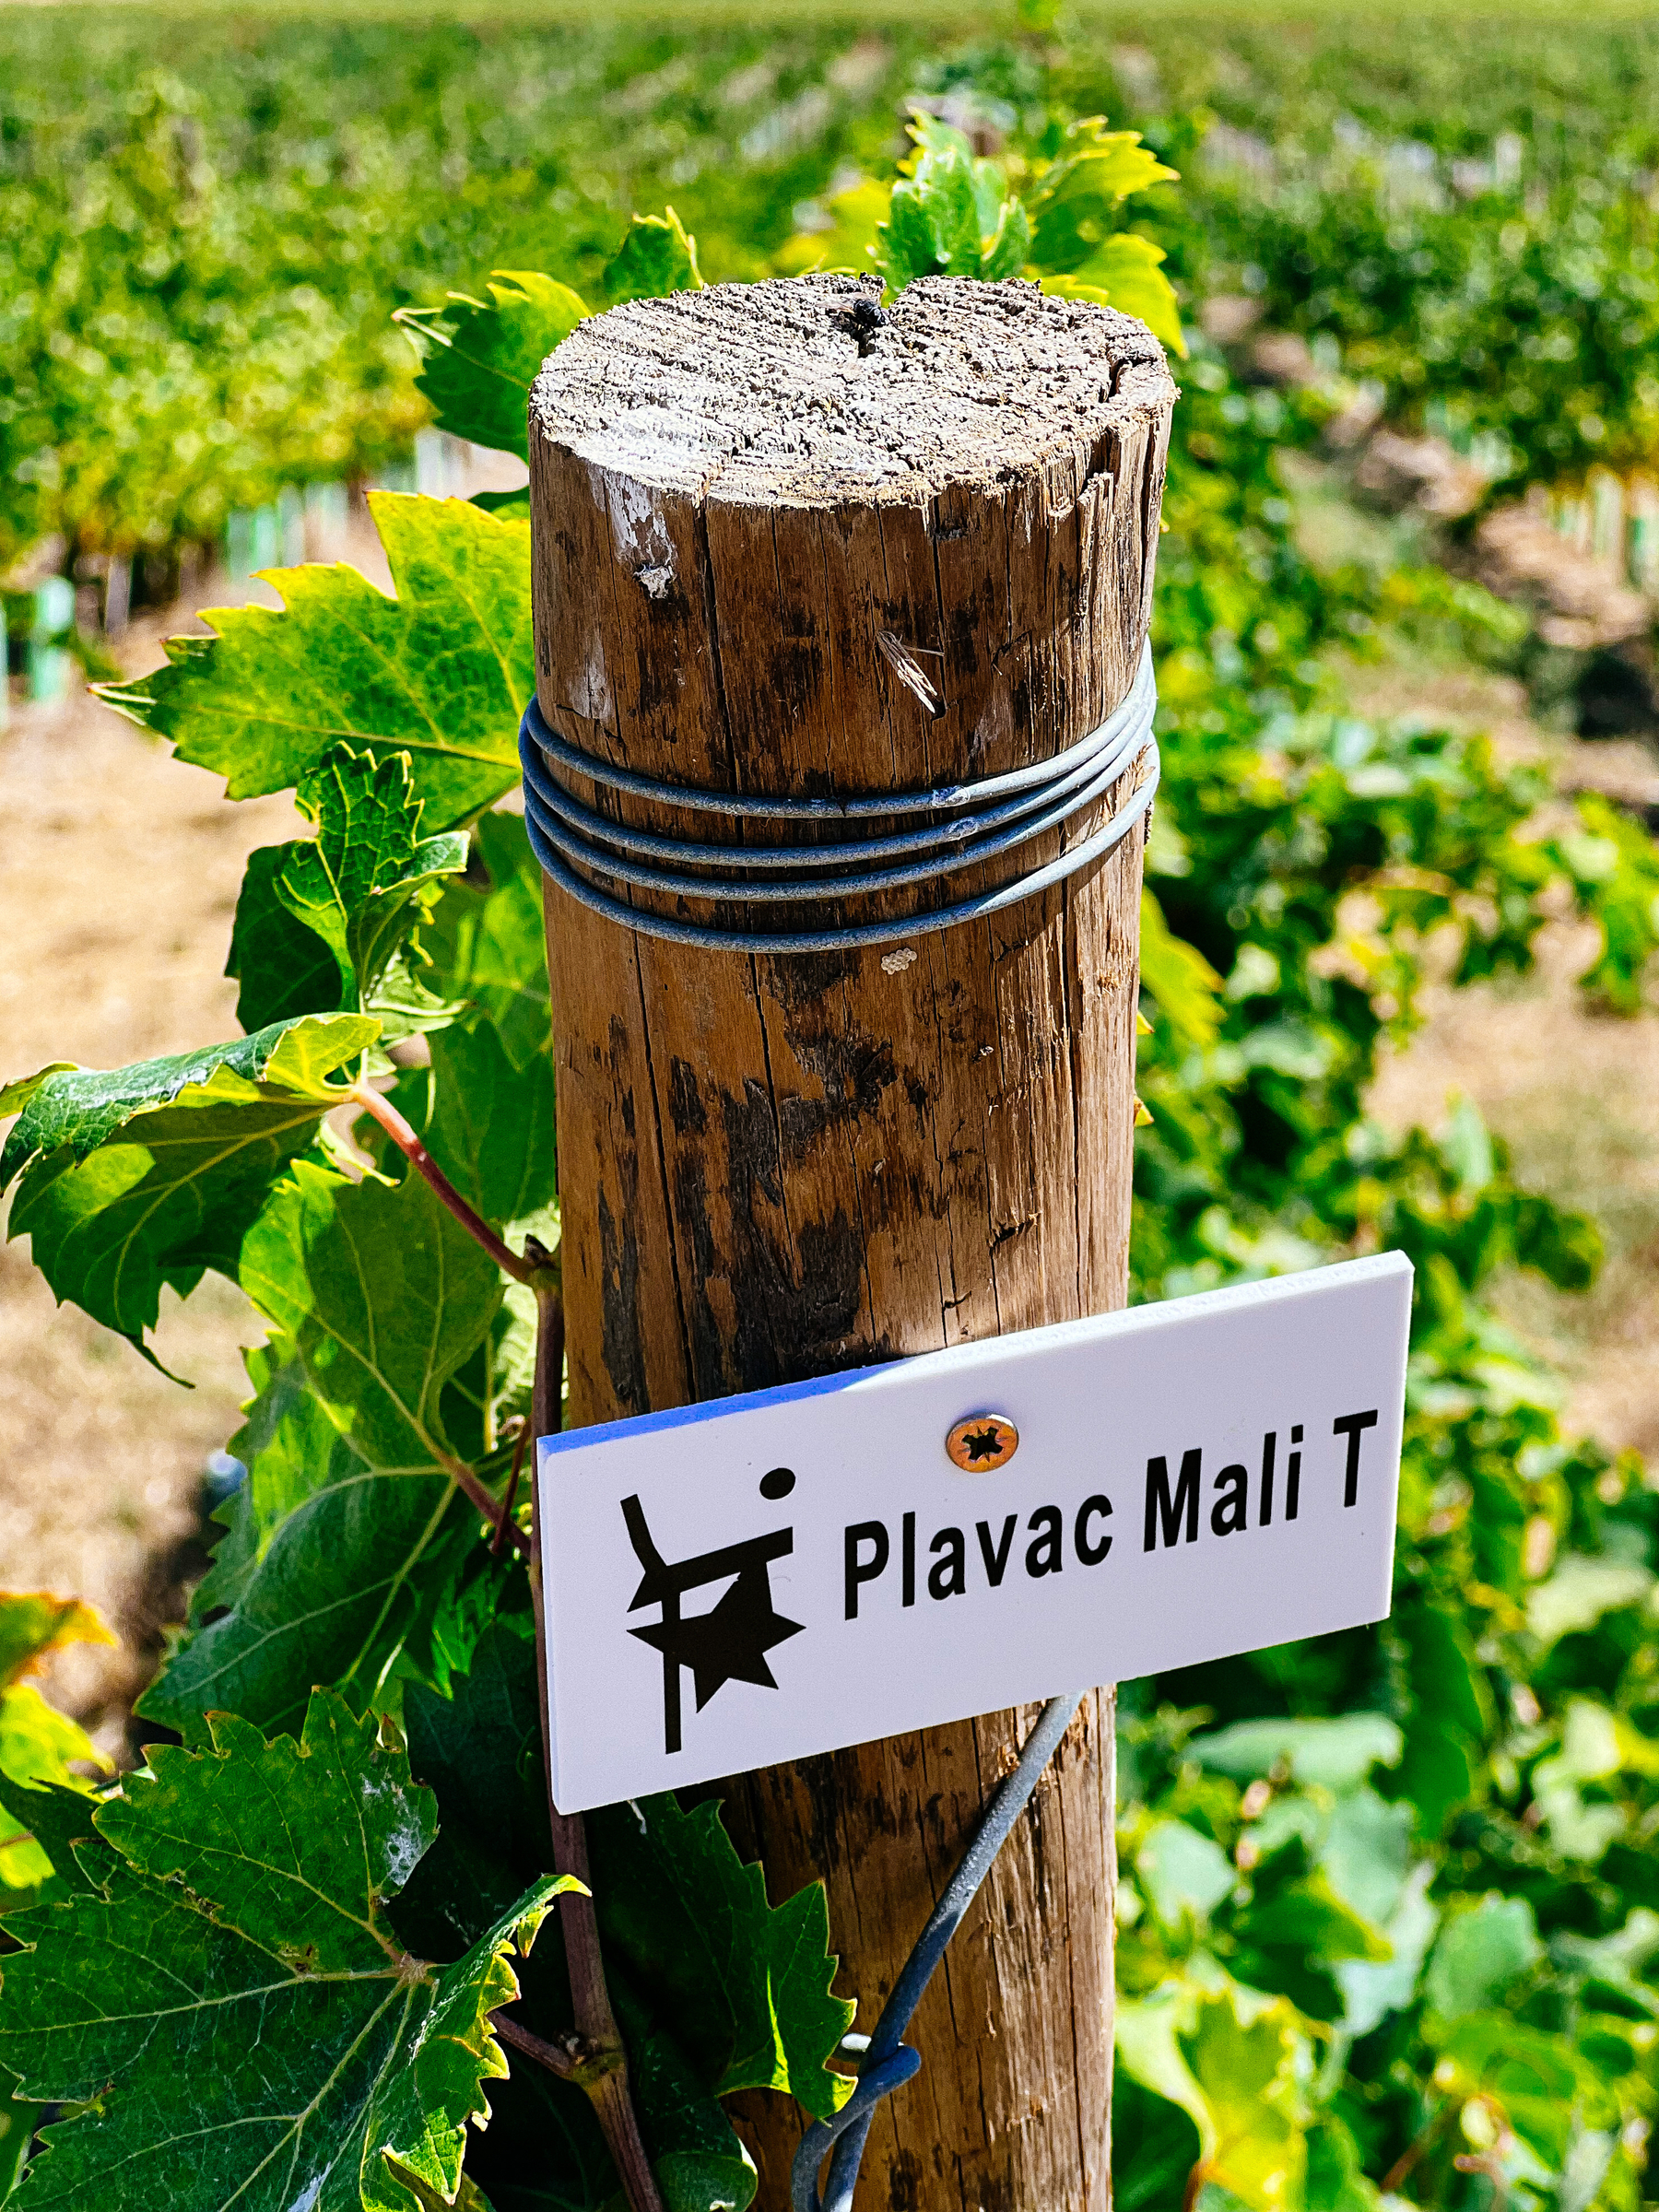 vineyard with a sign with the words “Plavac Mali T” on it